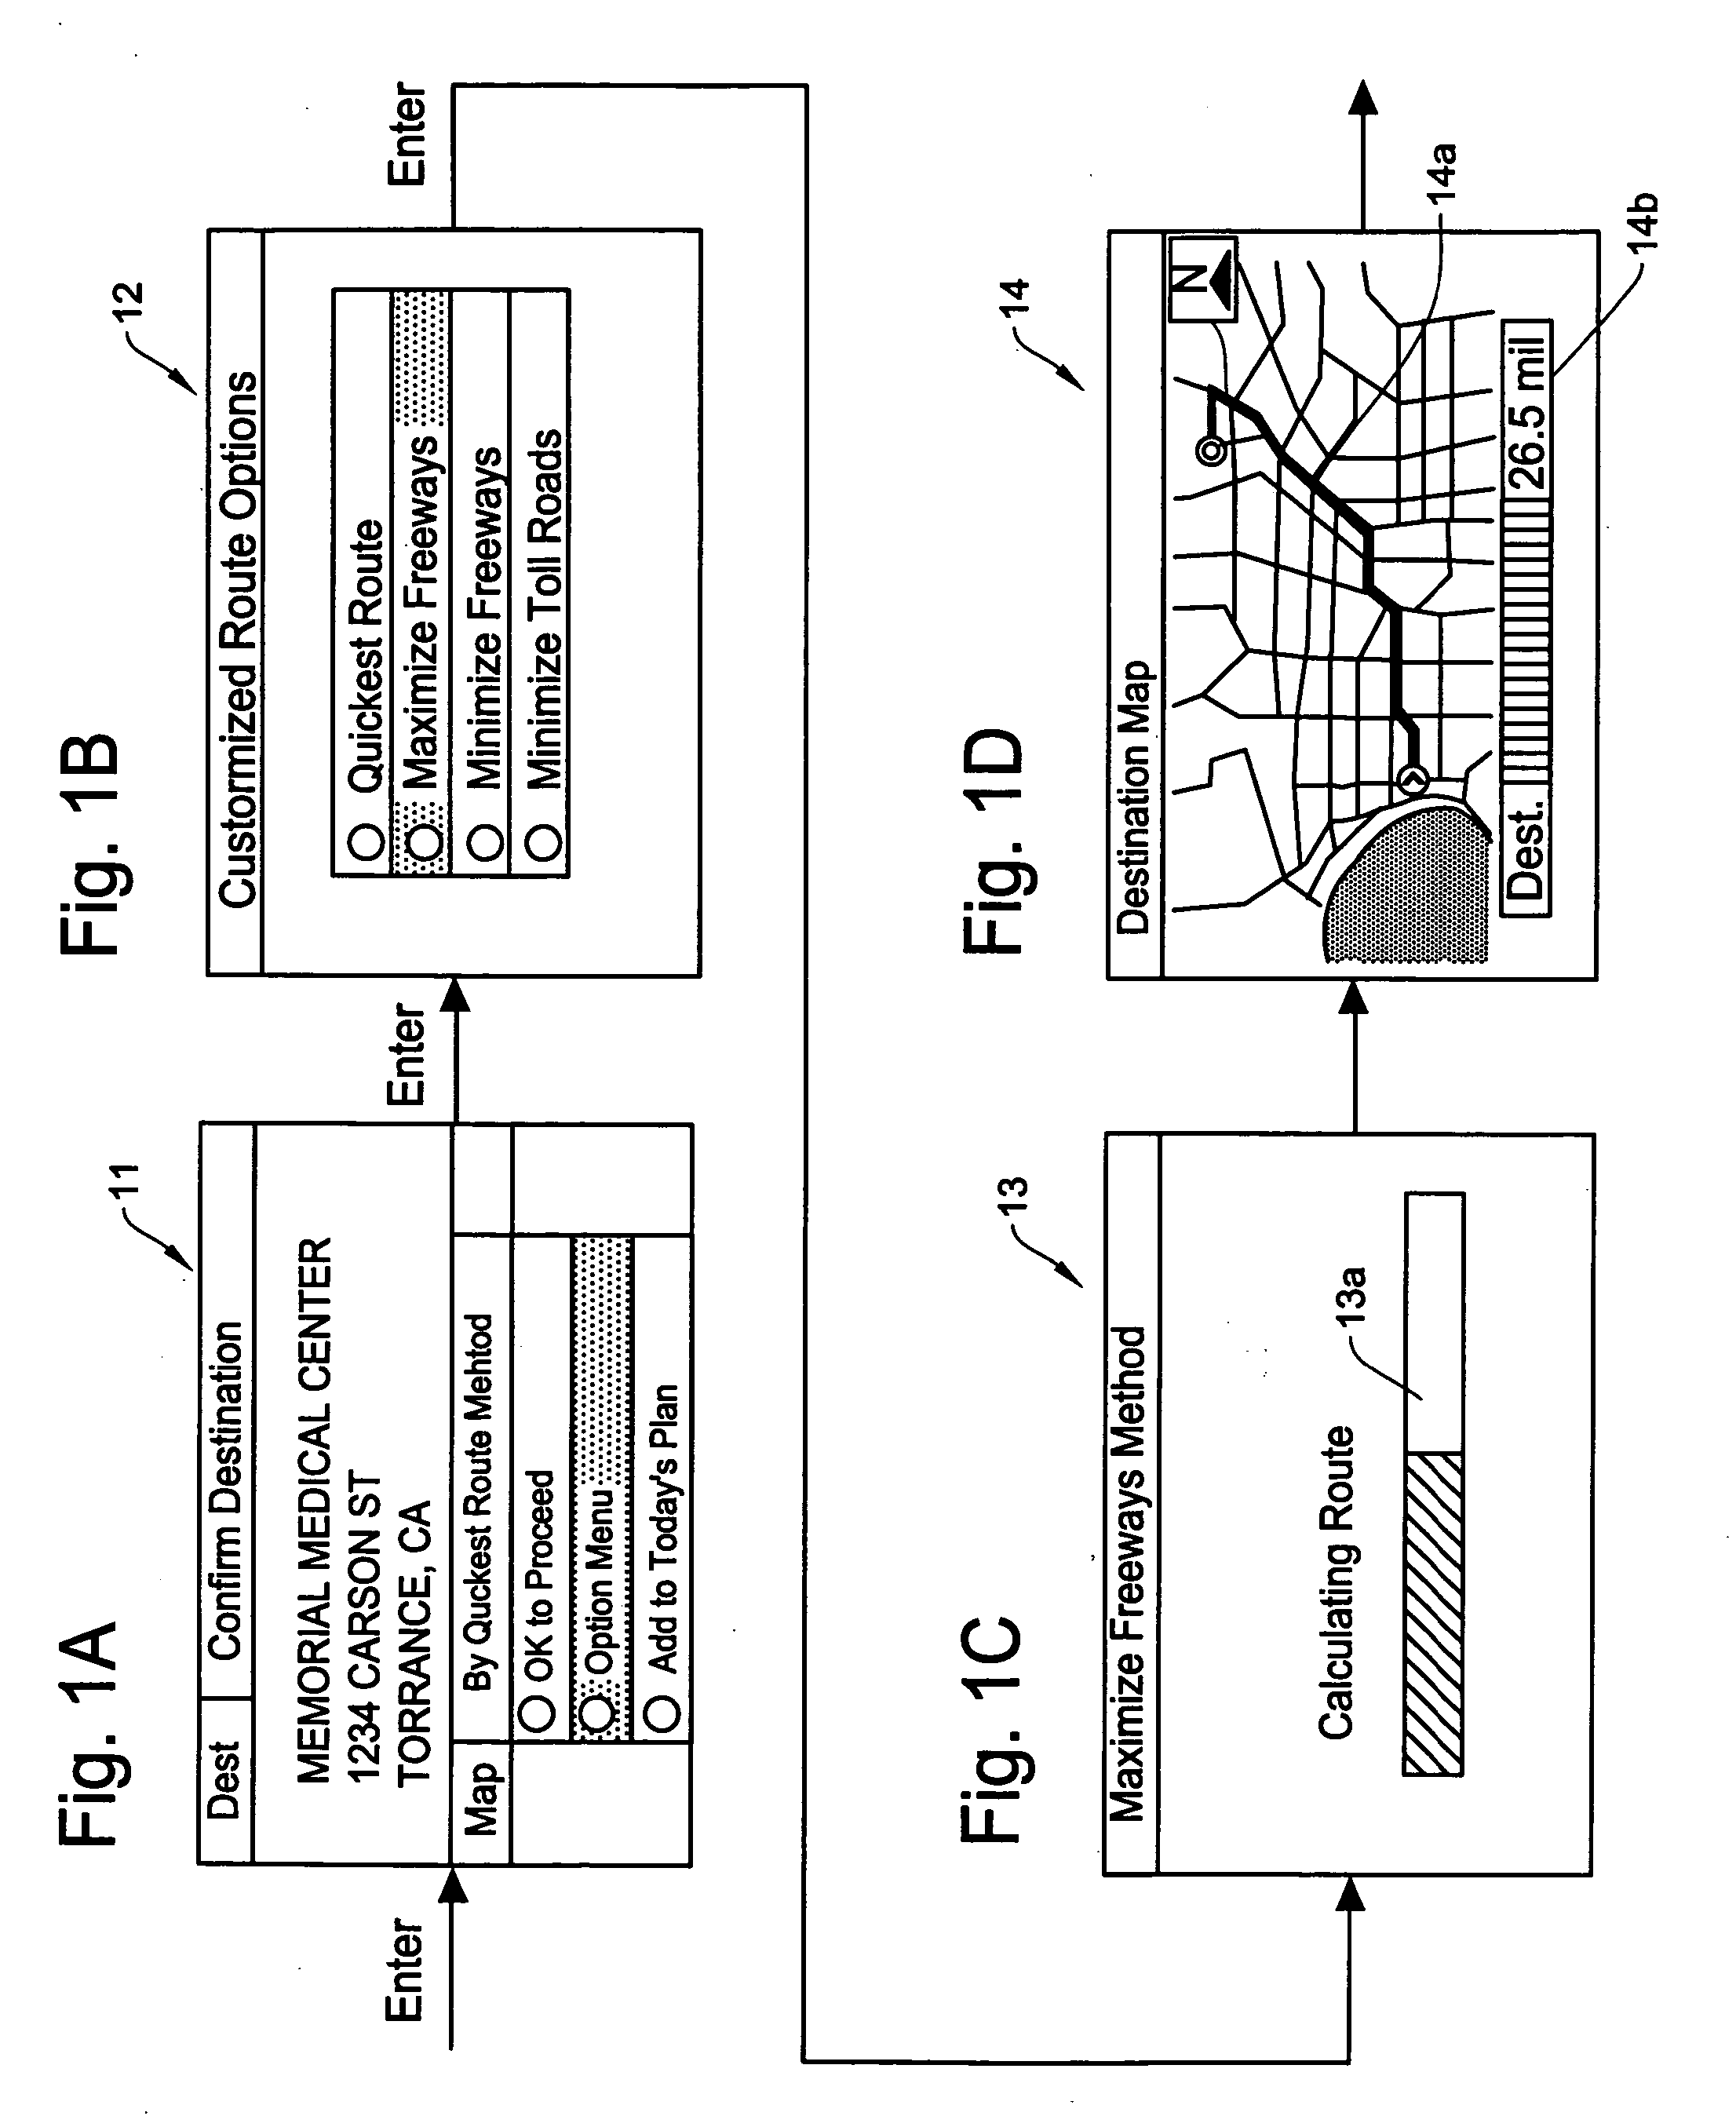 Traffic routing method and apparatus for navigation system to predict travel time and departure time